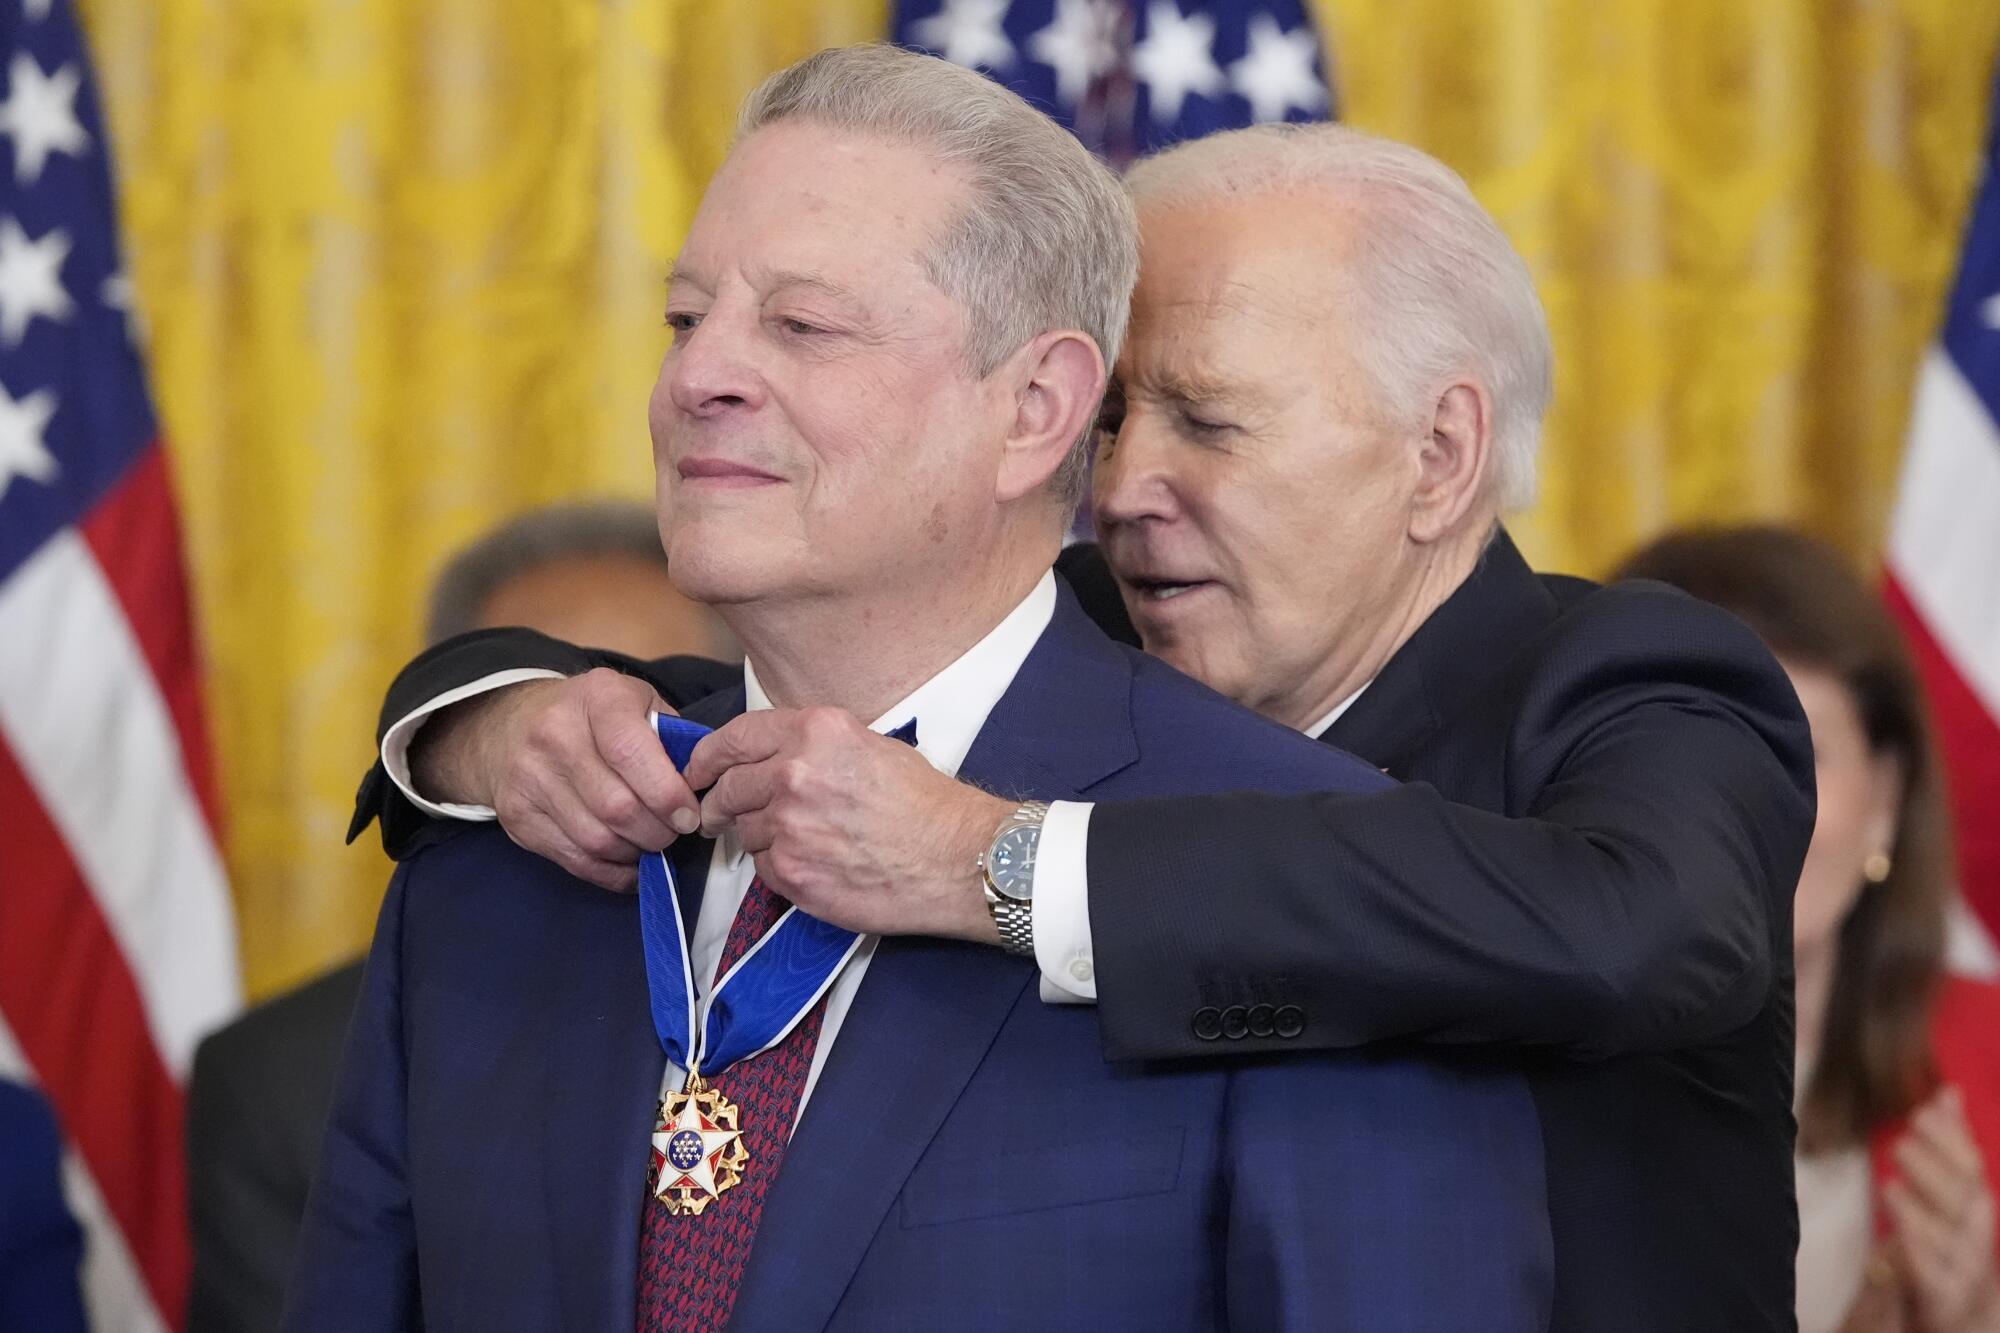 President Biden putting the Presidential Medal of Freedom around the neck of former Vice President Al Gore.